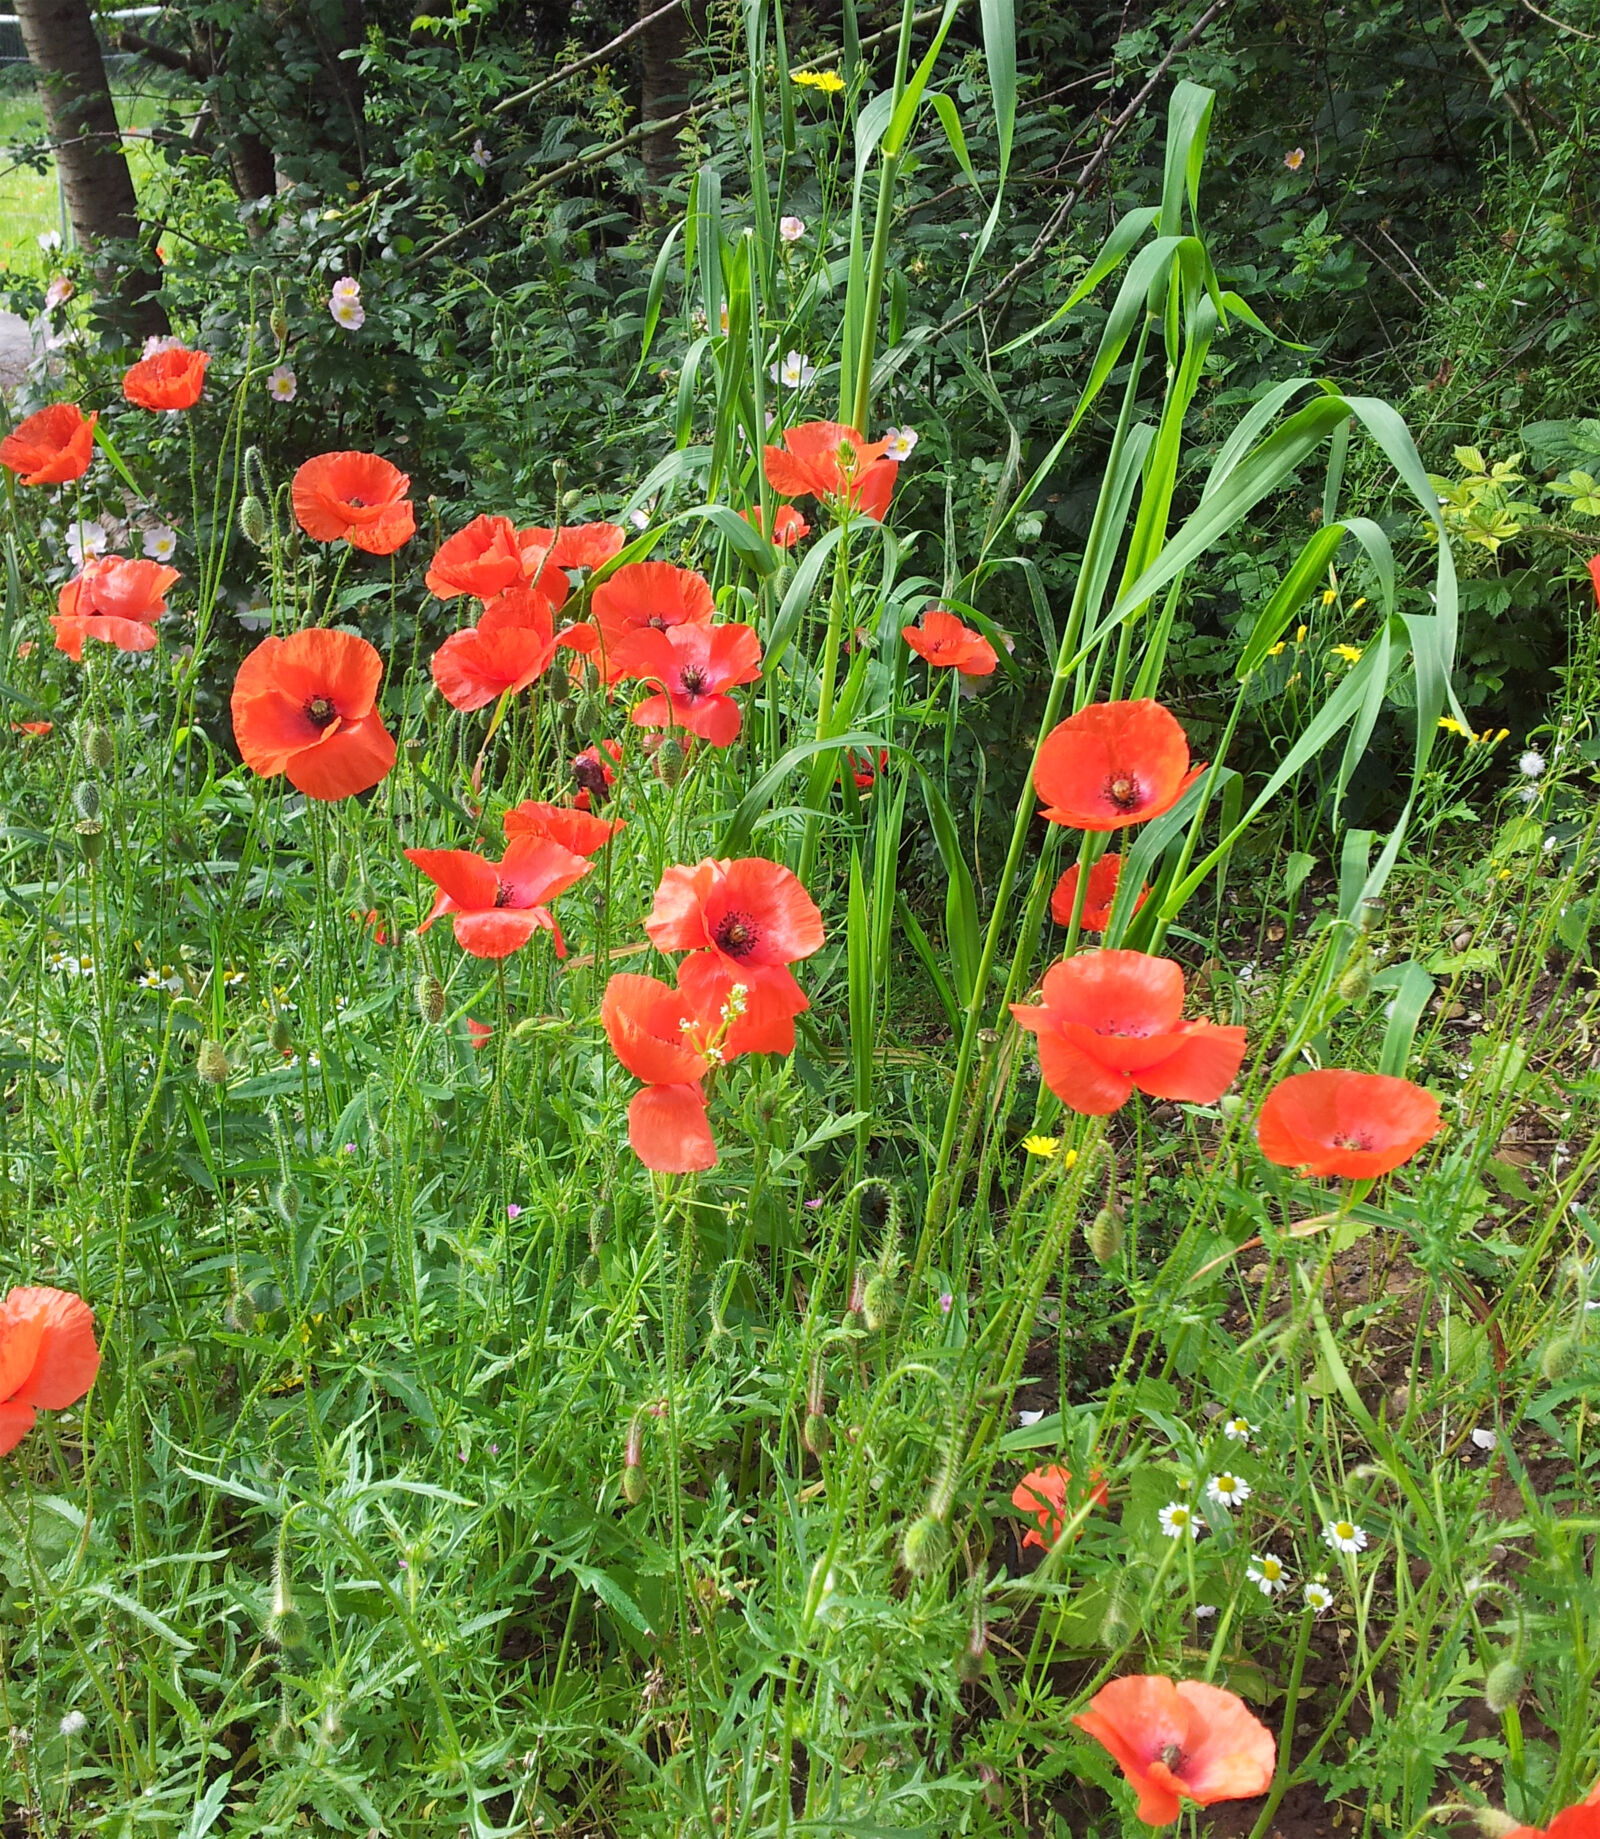 Samsung Galaxy S2 sample photo. Flowers, nature, poppies, poppy photography